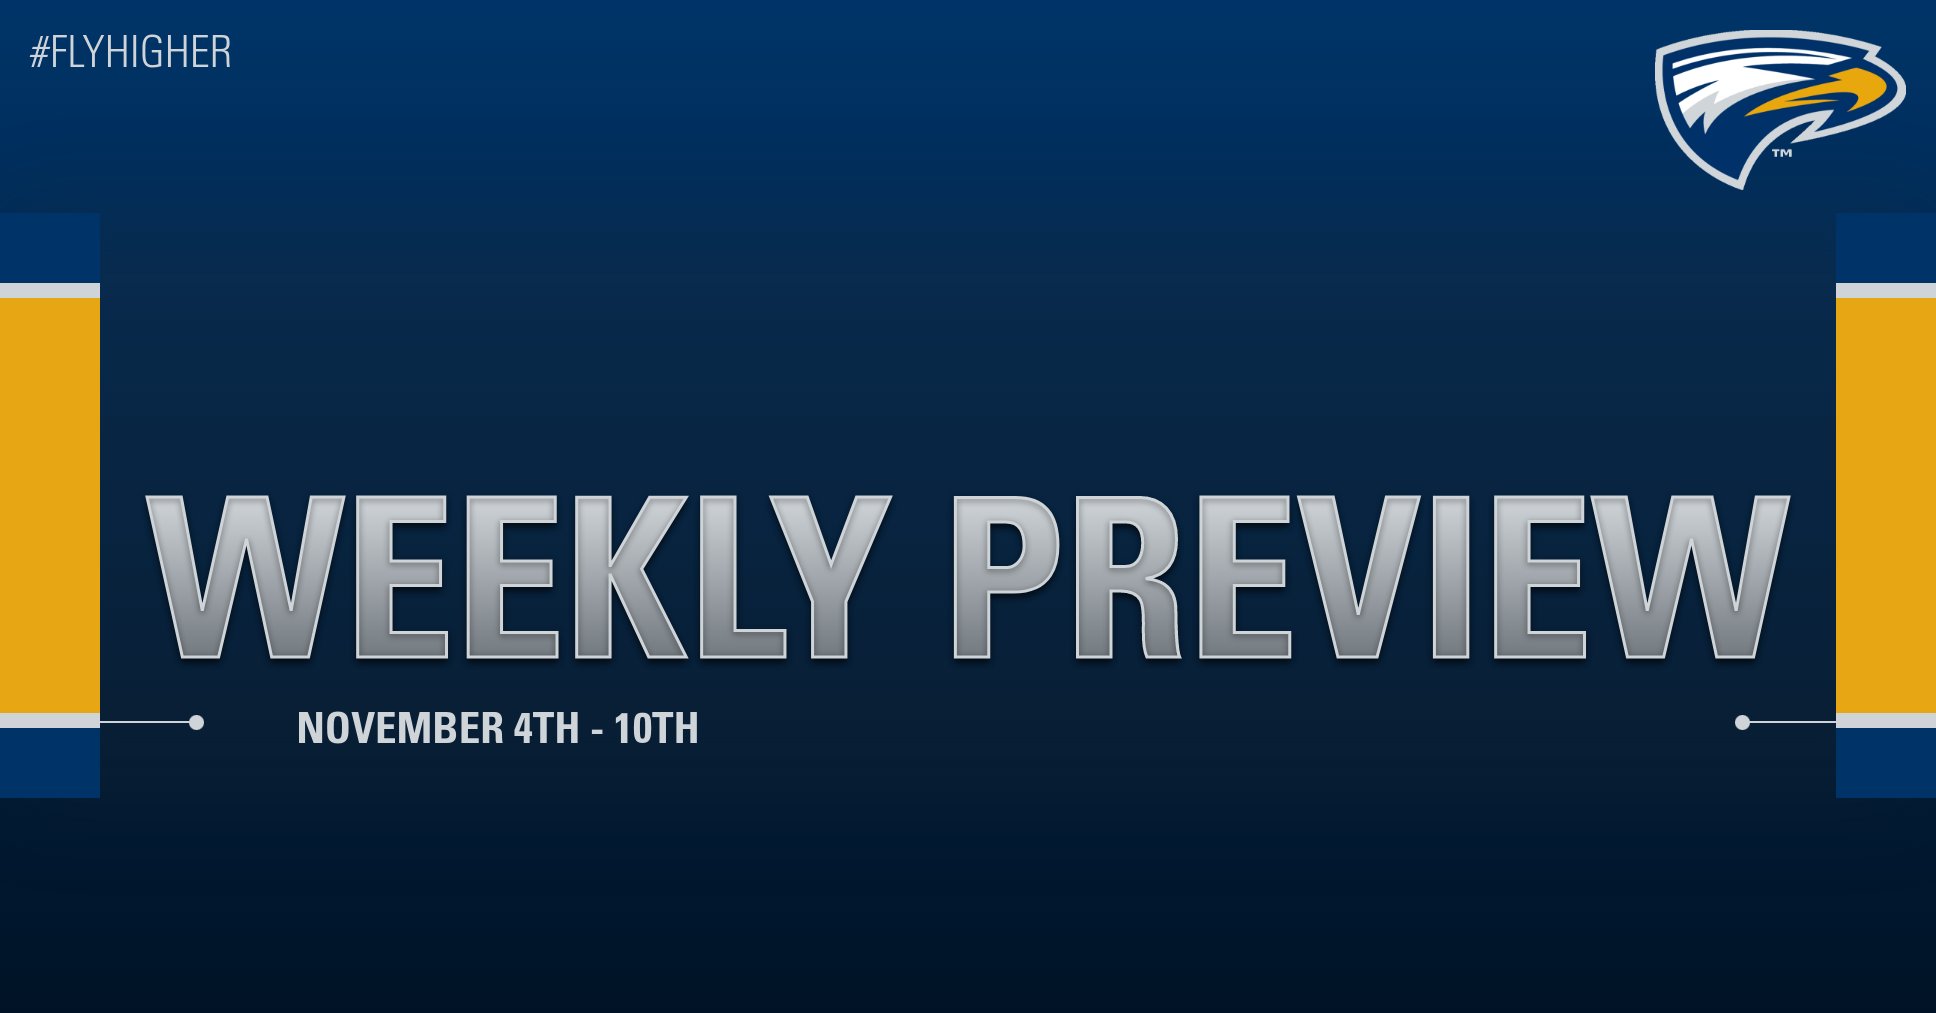 Emory Athletics Weekly Preview - November 4th - 10th